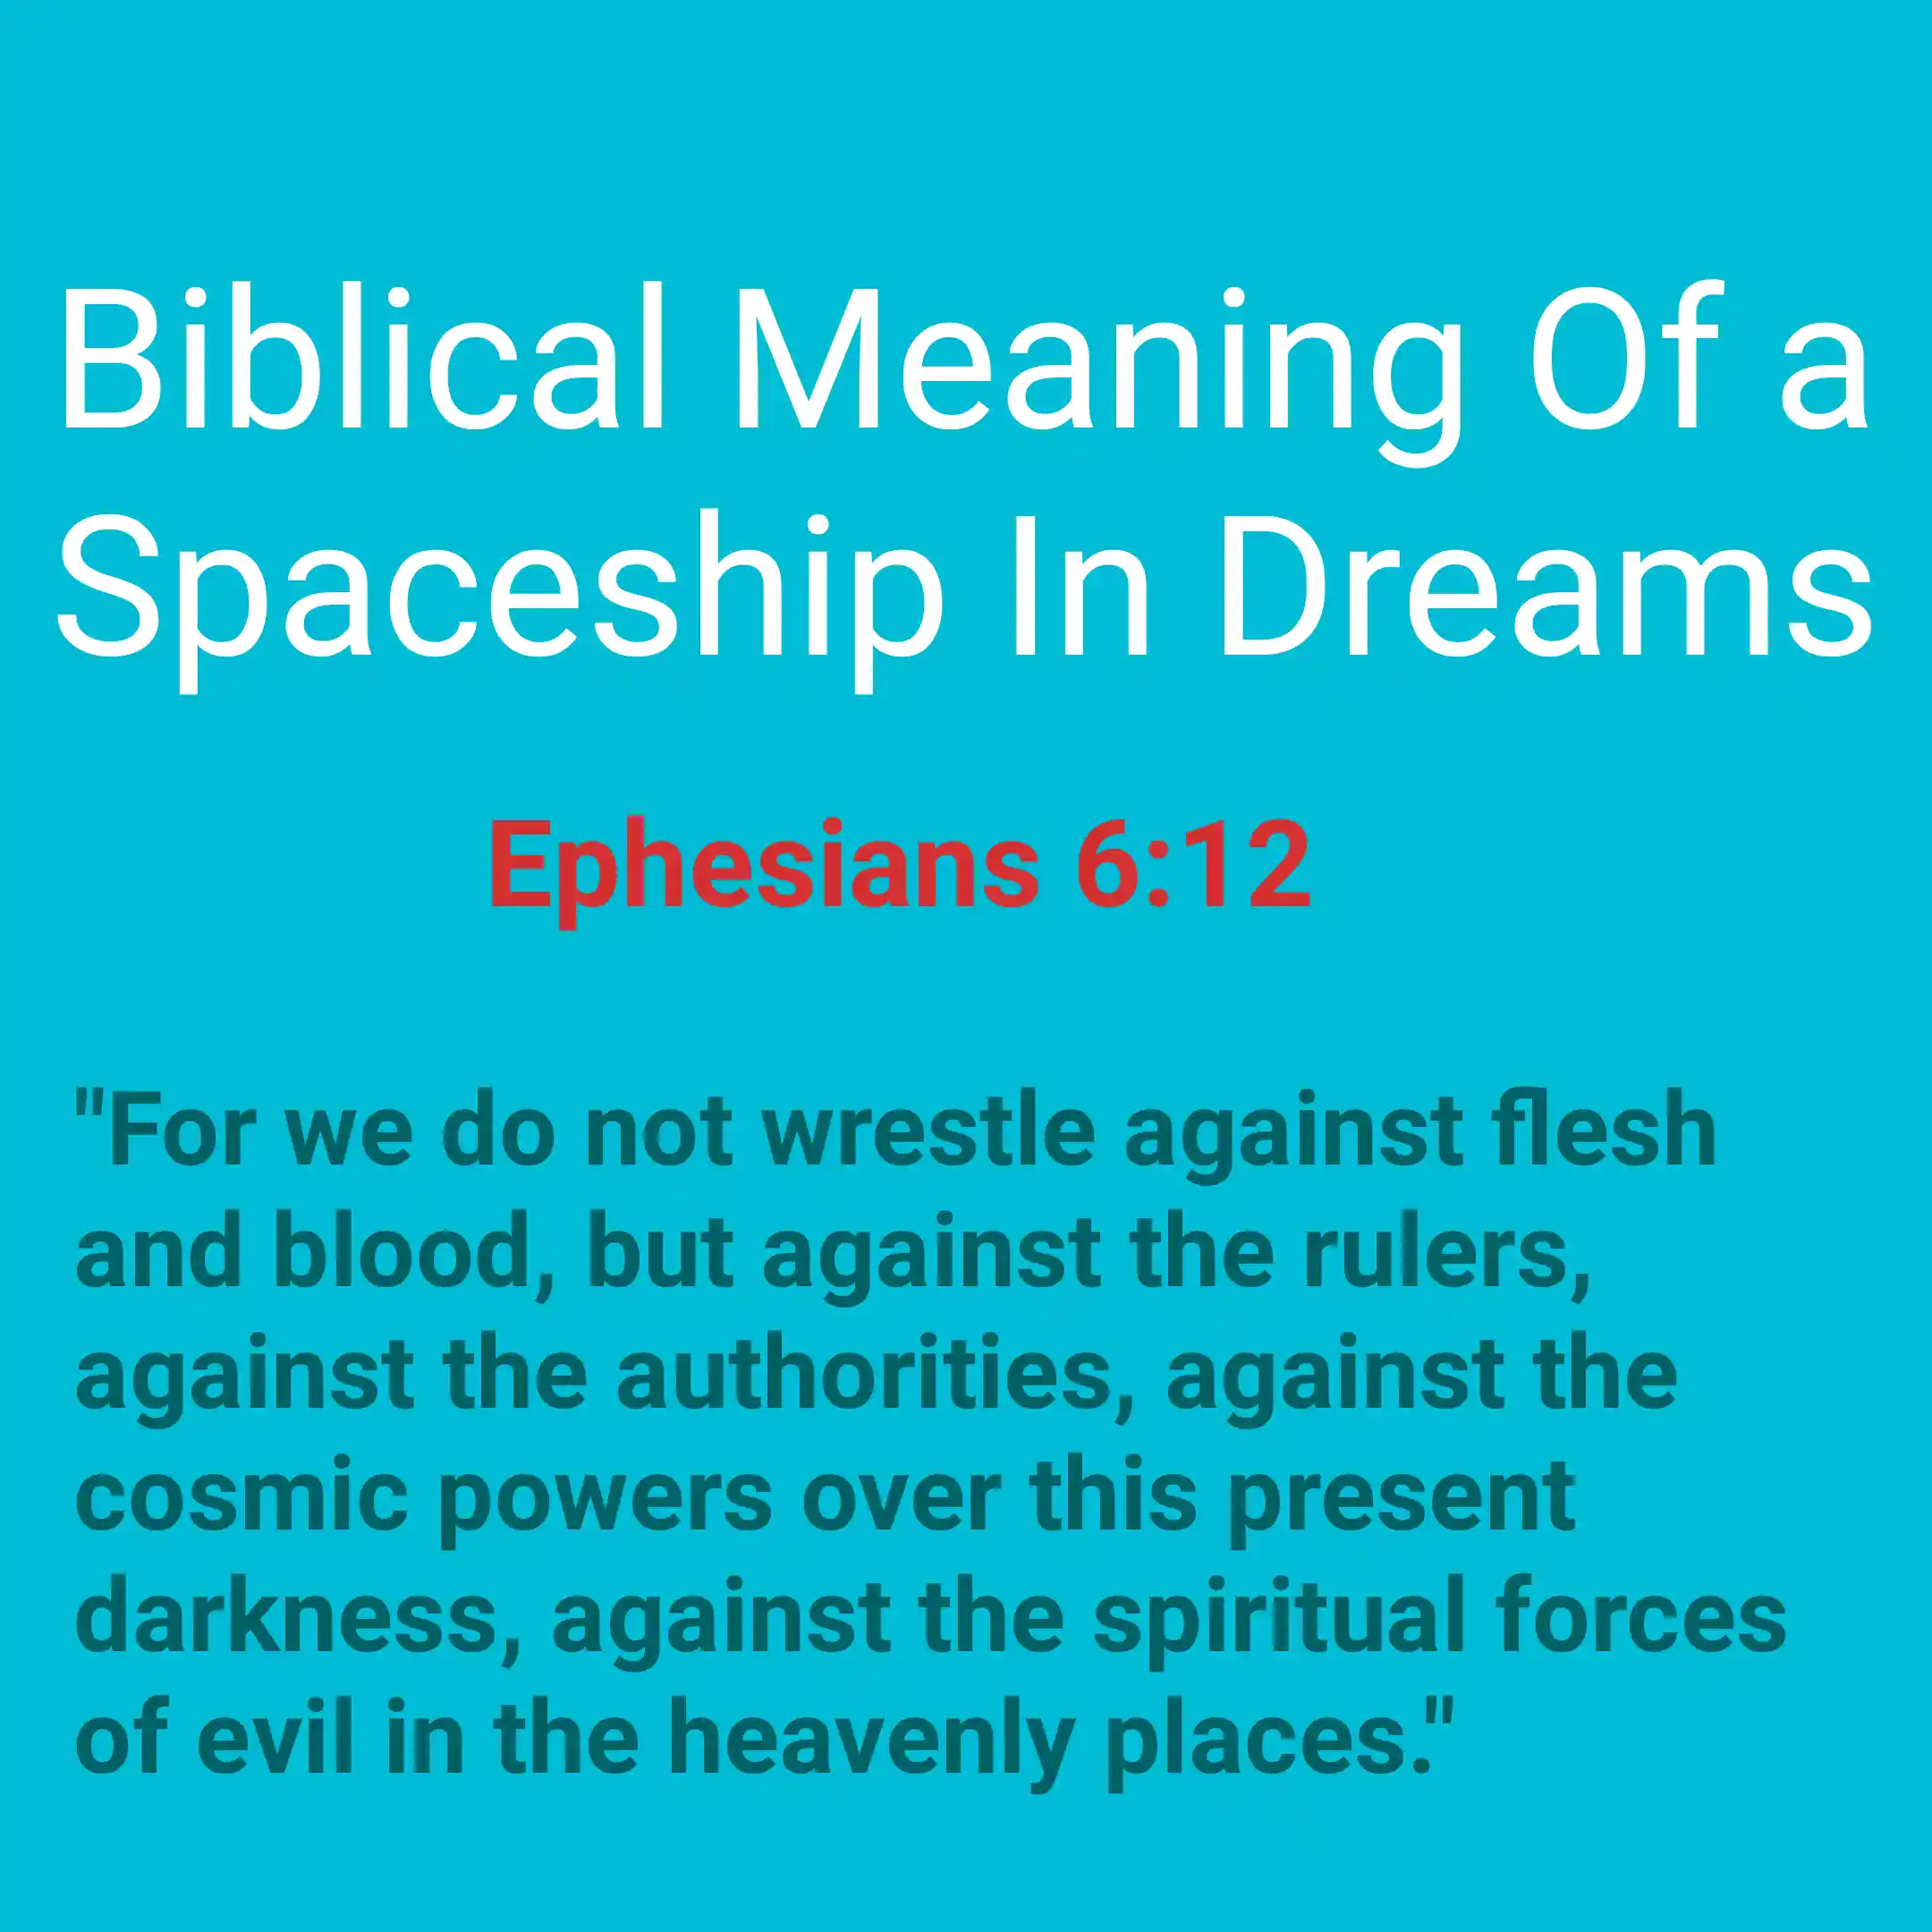 Biblical Meaning Of a Spaceship In Dreams